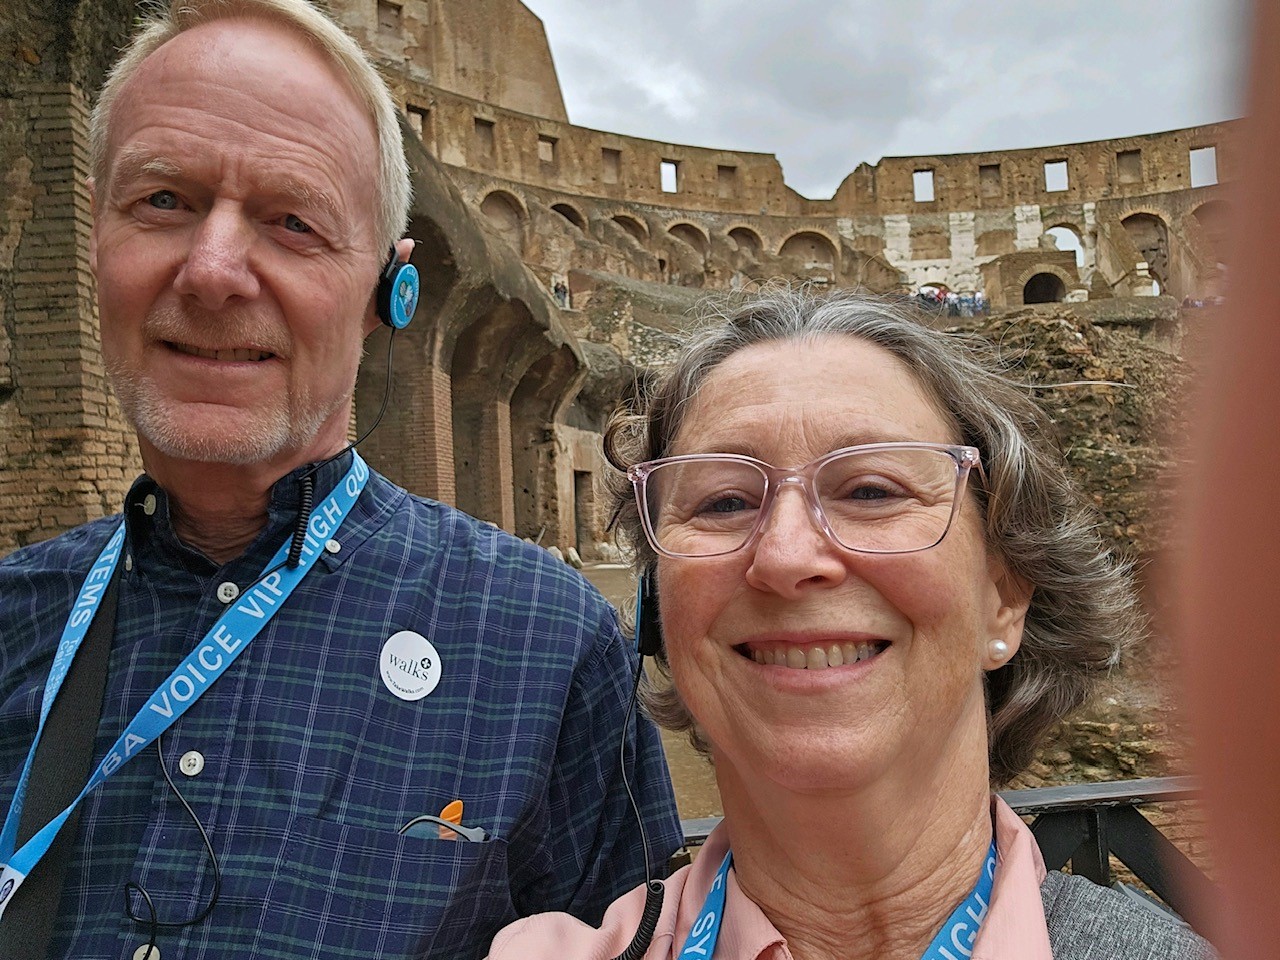 Couple visits the Colosseum